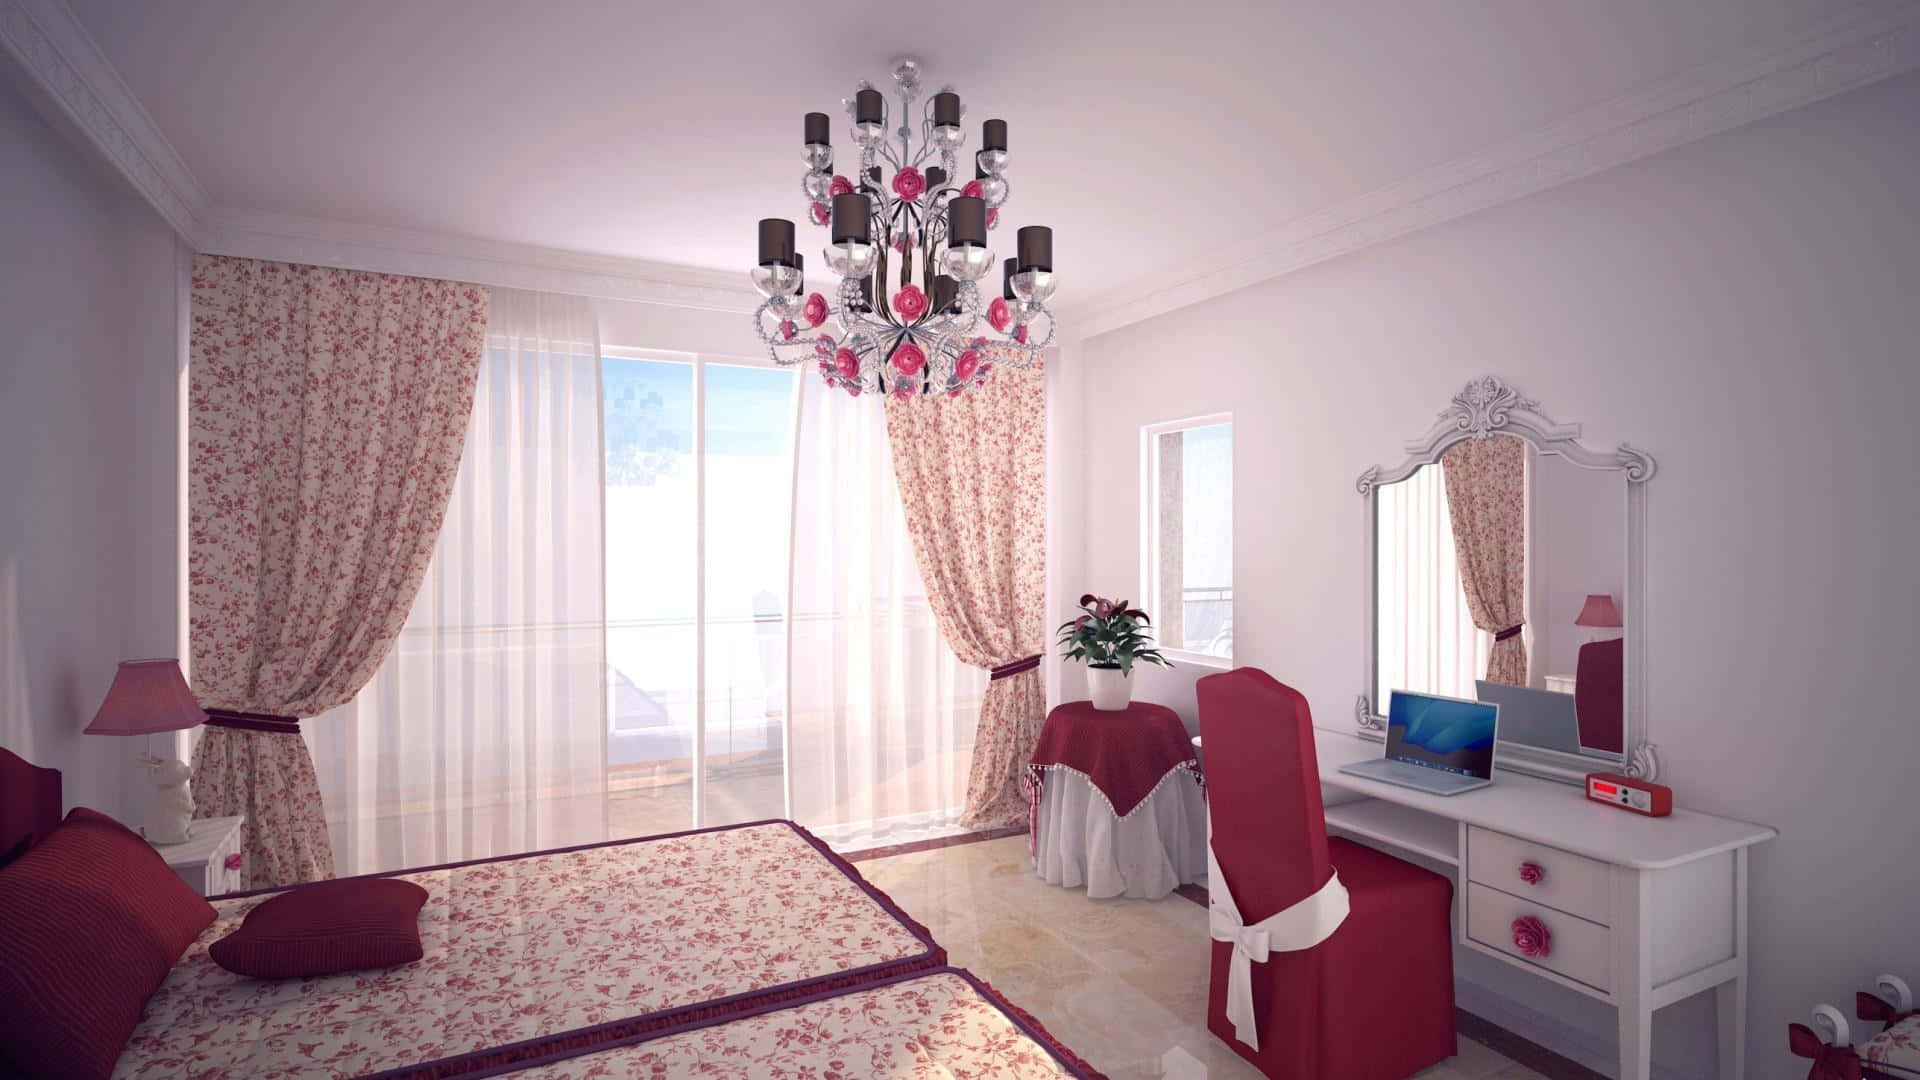 A Bedroom With A Chandelier And Red And White Decor